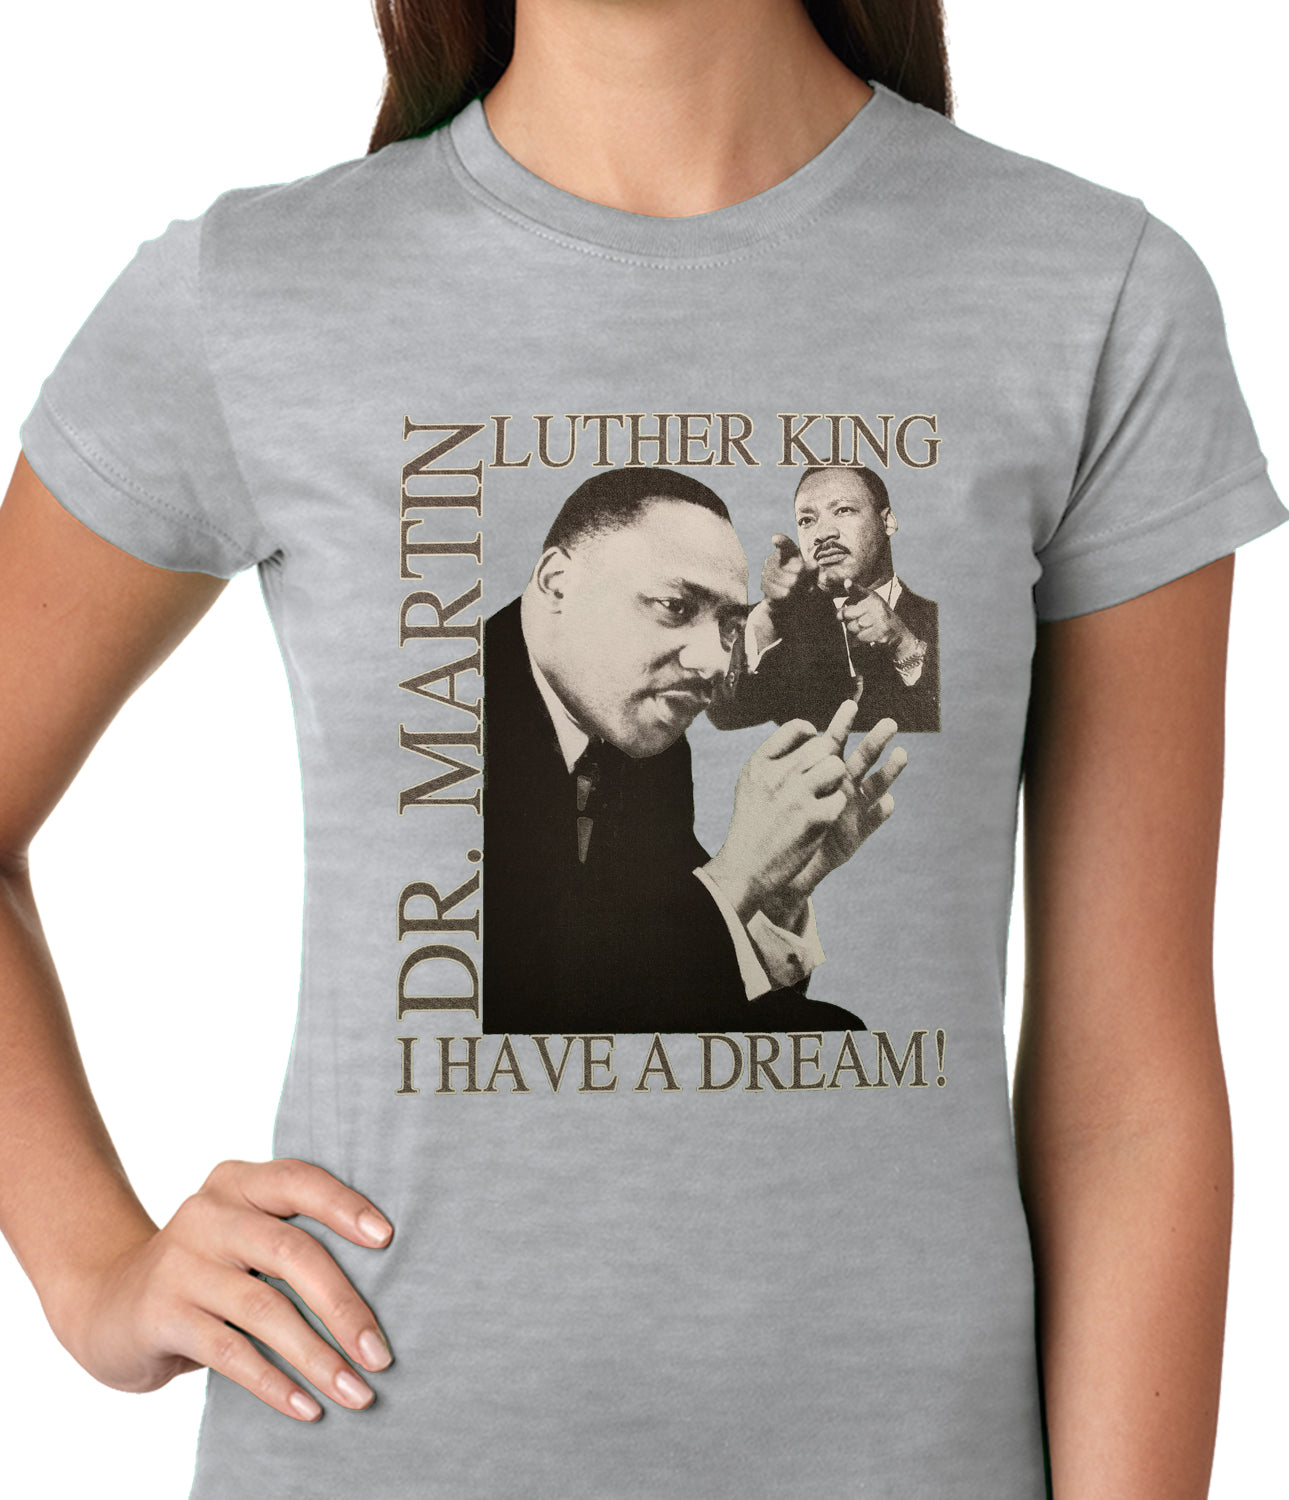 Dr. Martin Luther King Jr. "I Have a Dream" Girl's T-Shirt